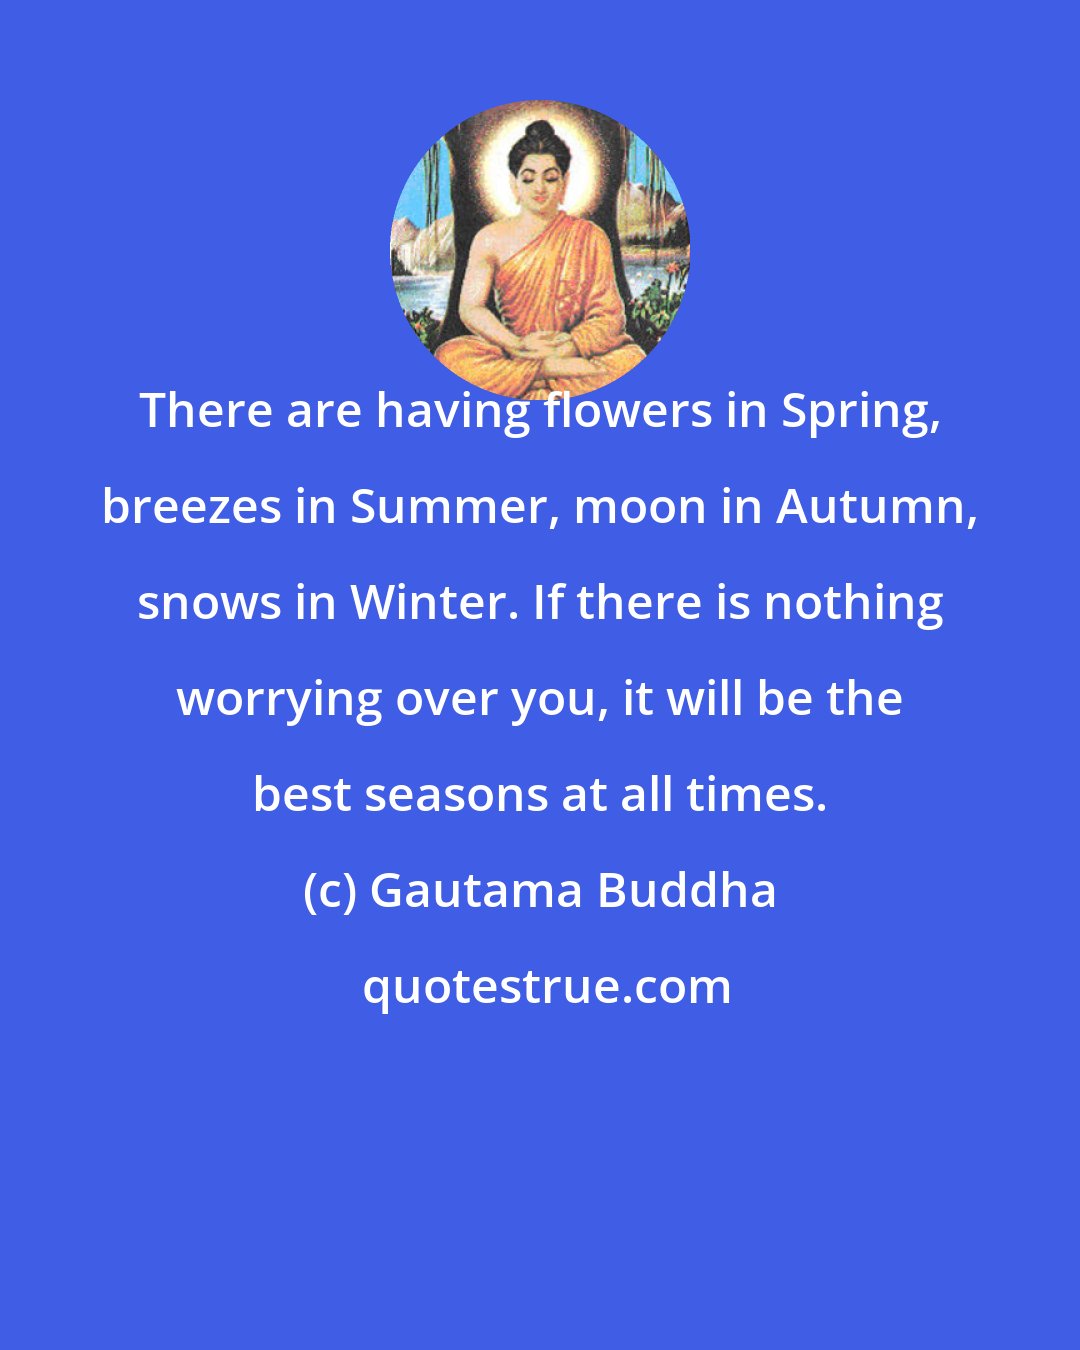 Gautama Buddha: There are having flowers in Spring, breezes in Summer, moon in Autumn, snows in Winter. If there is nothing worrying over you, it will be the best seasons at all times.